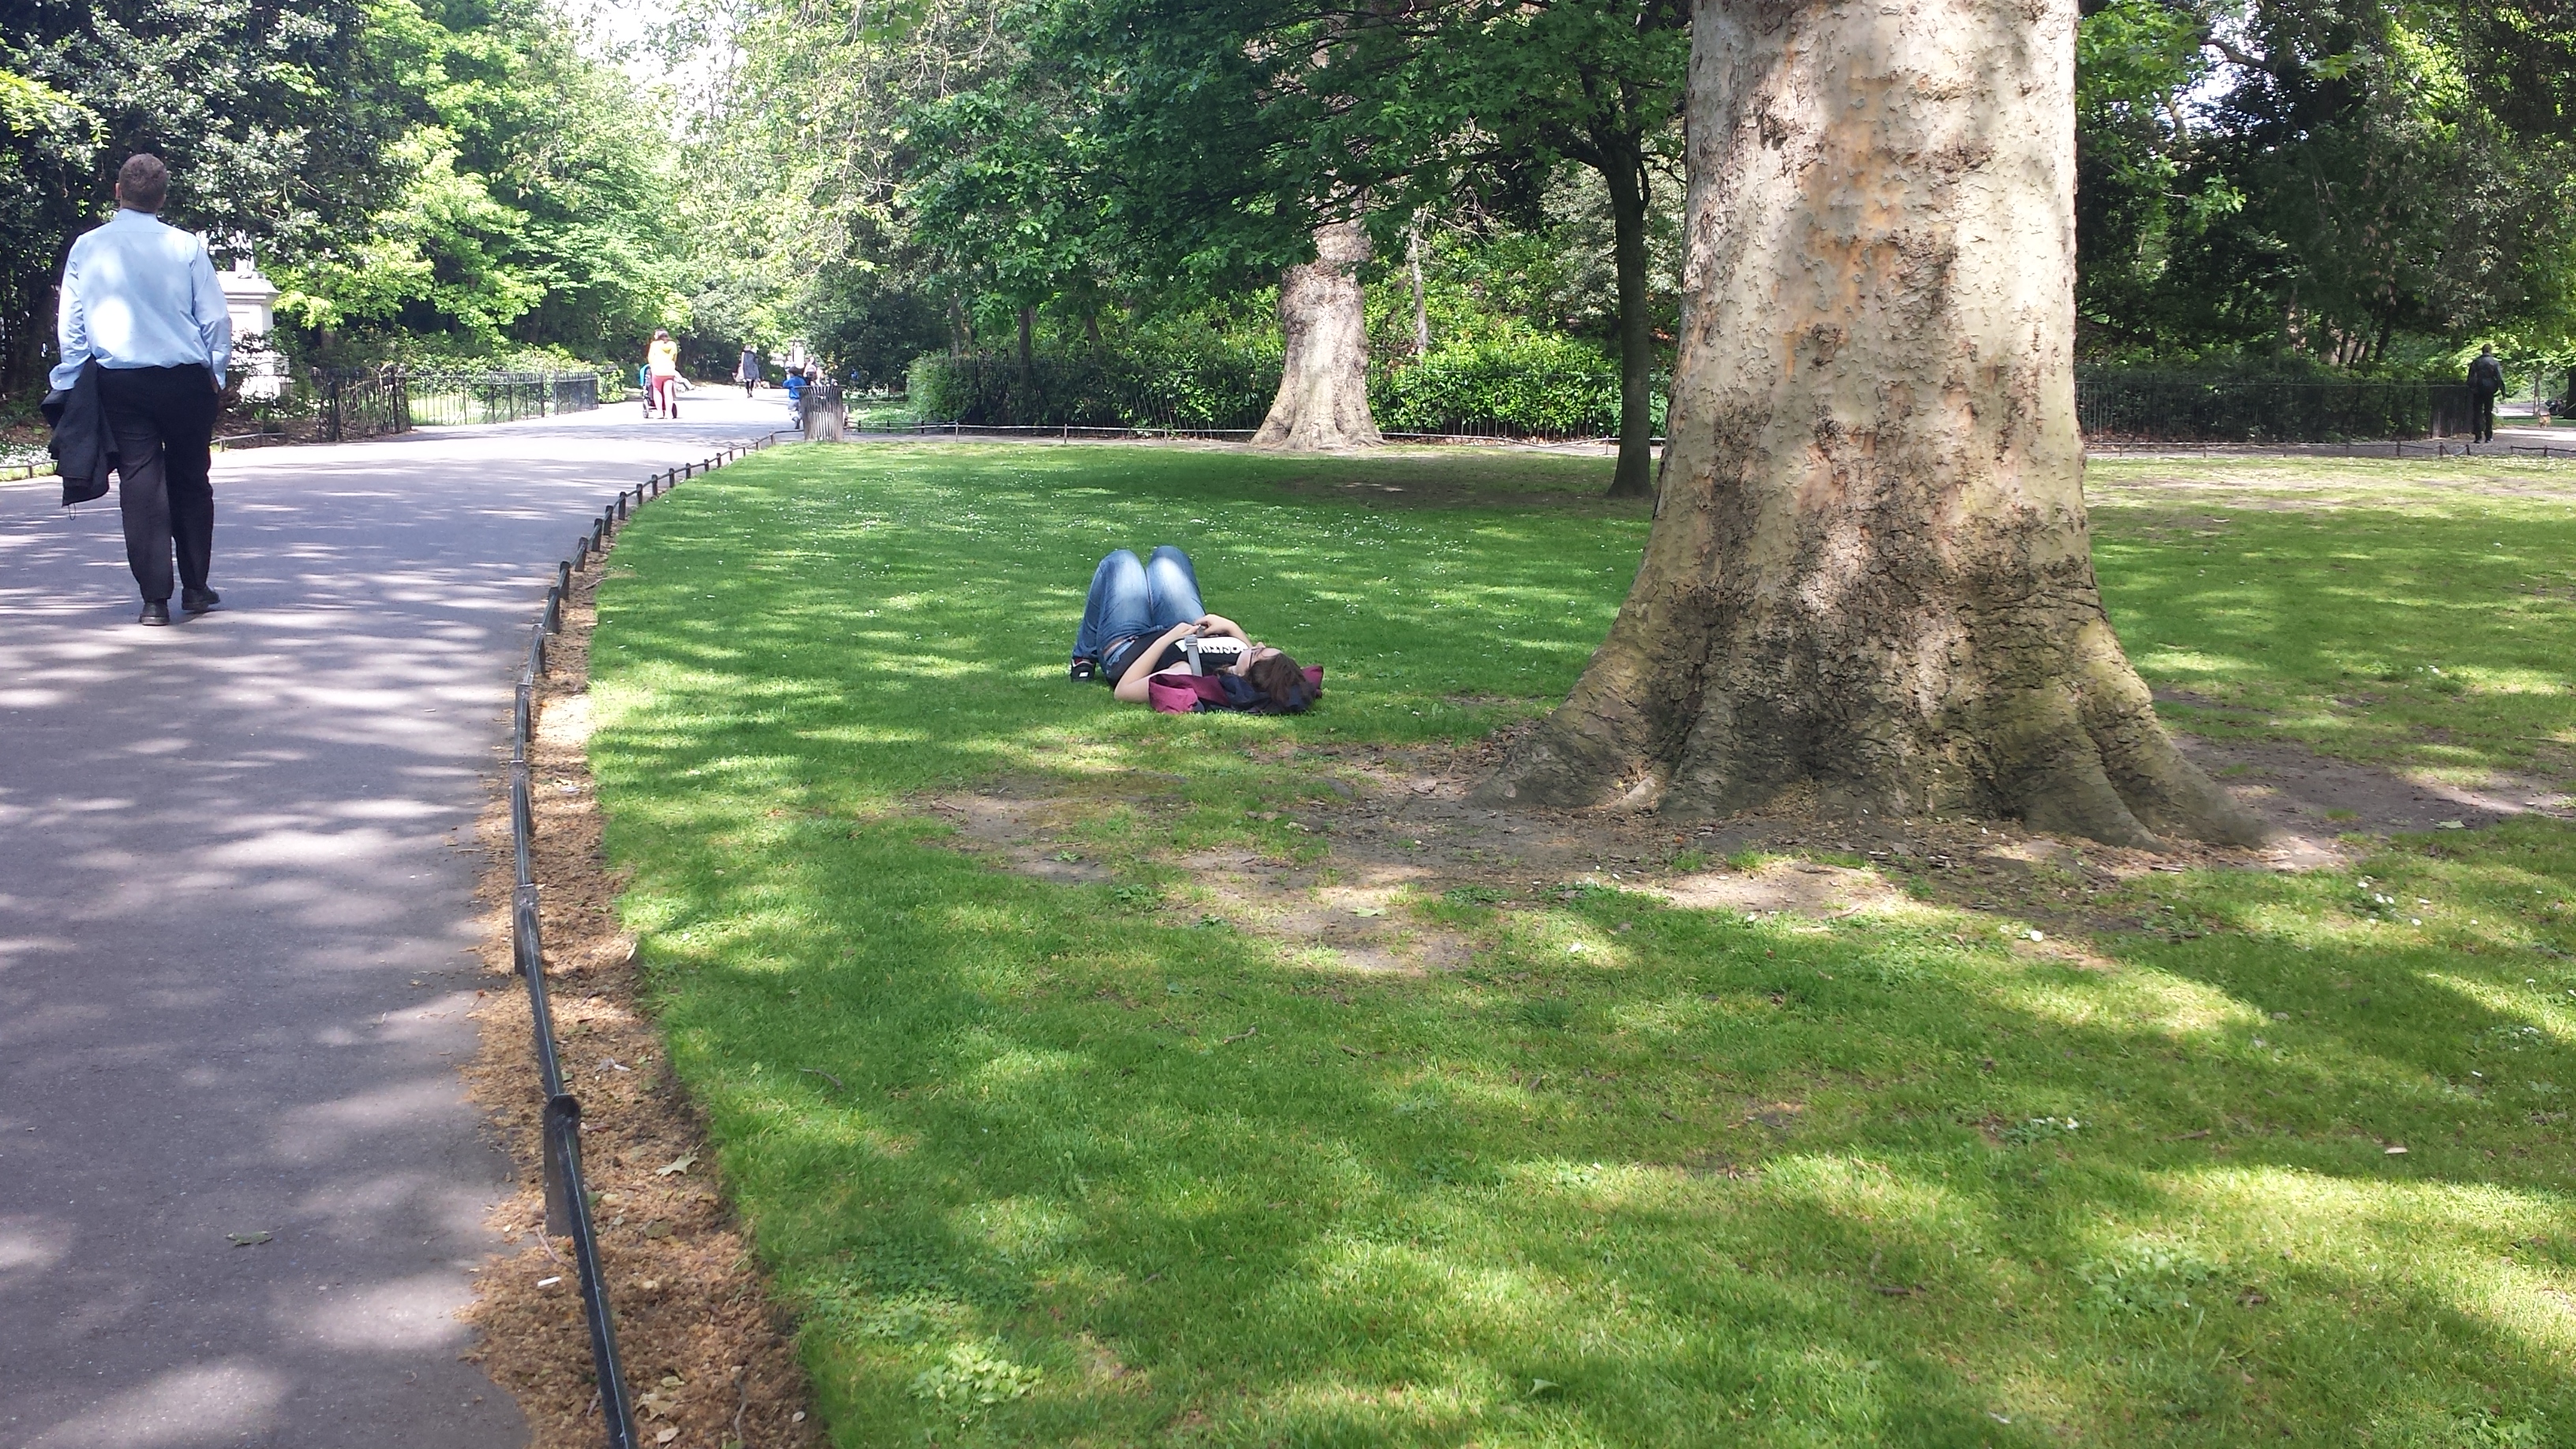 Bri's friend Catherine napping on a patch of green grass, a tree near her. There are people walking in the park in the left hand side of the picture.